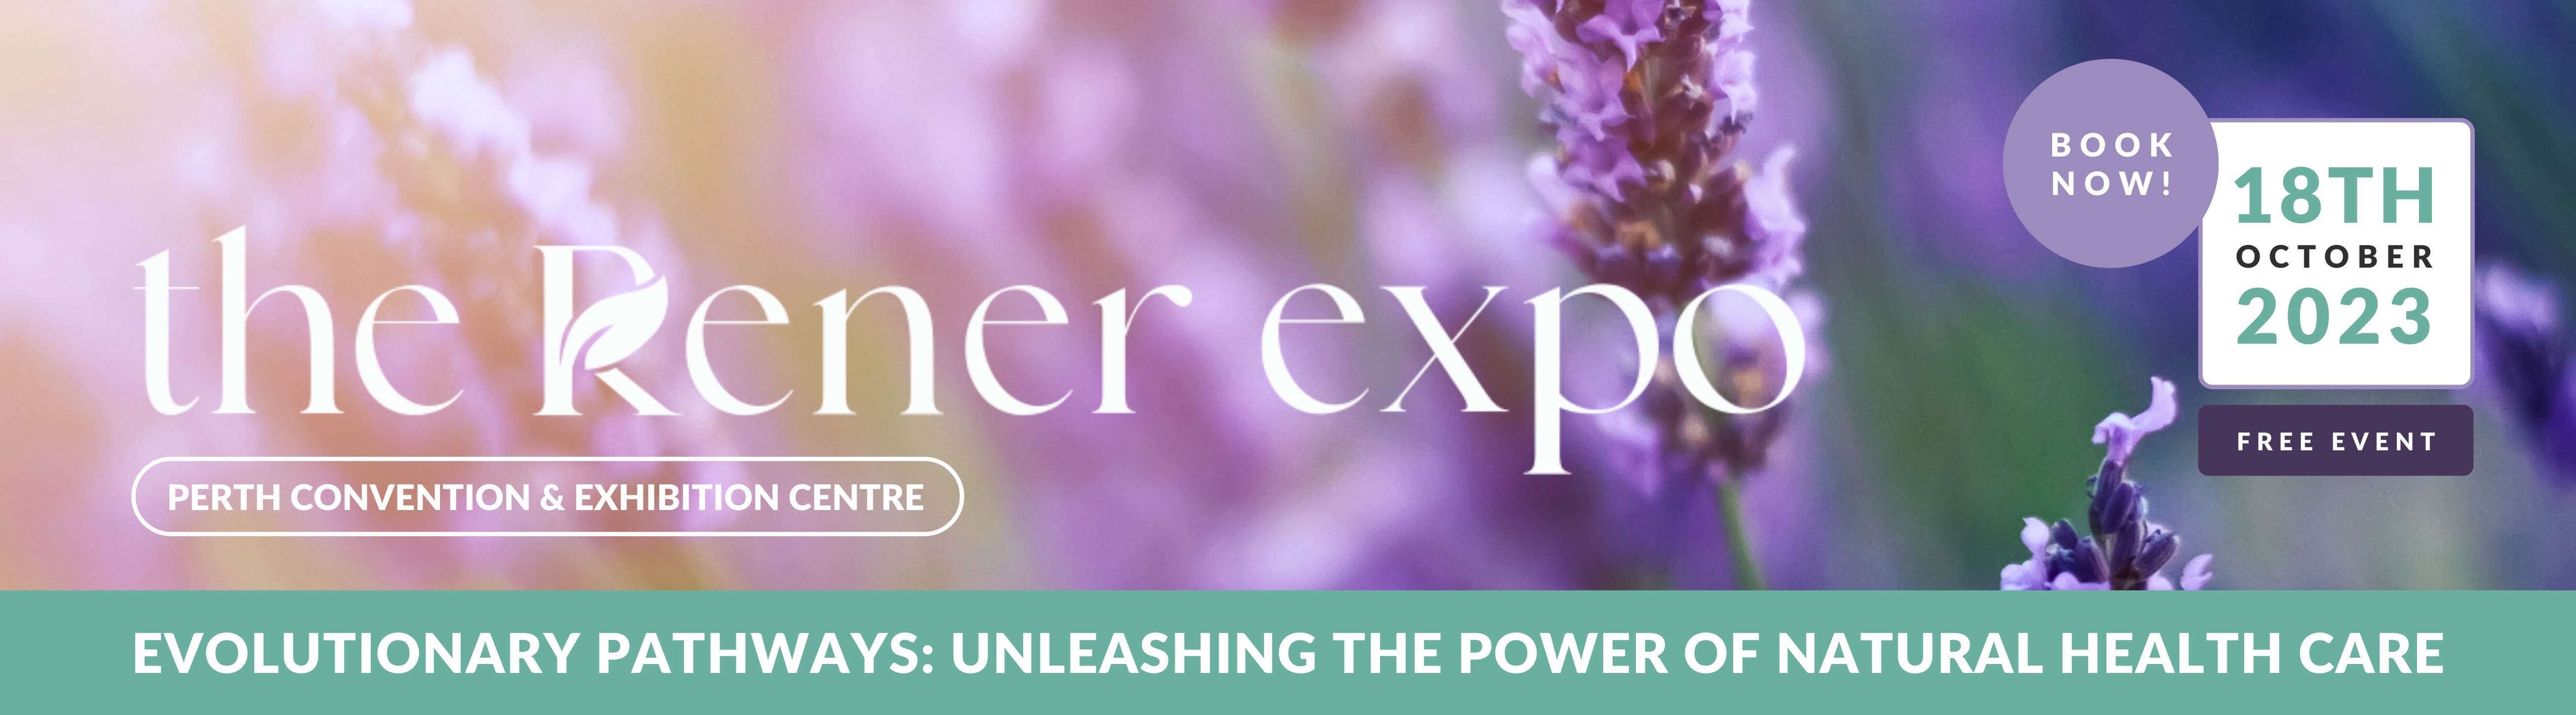 The Rener Expo 2023 - Evolutionary Pathways: Unleashing The Power Of Natural Health Care